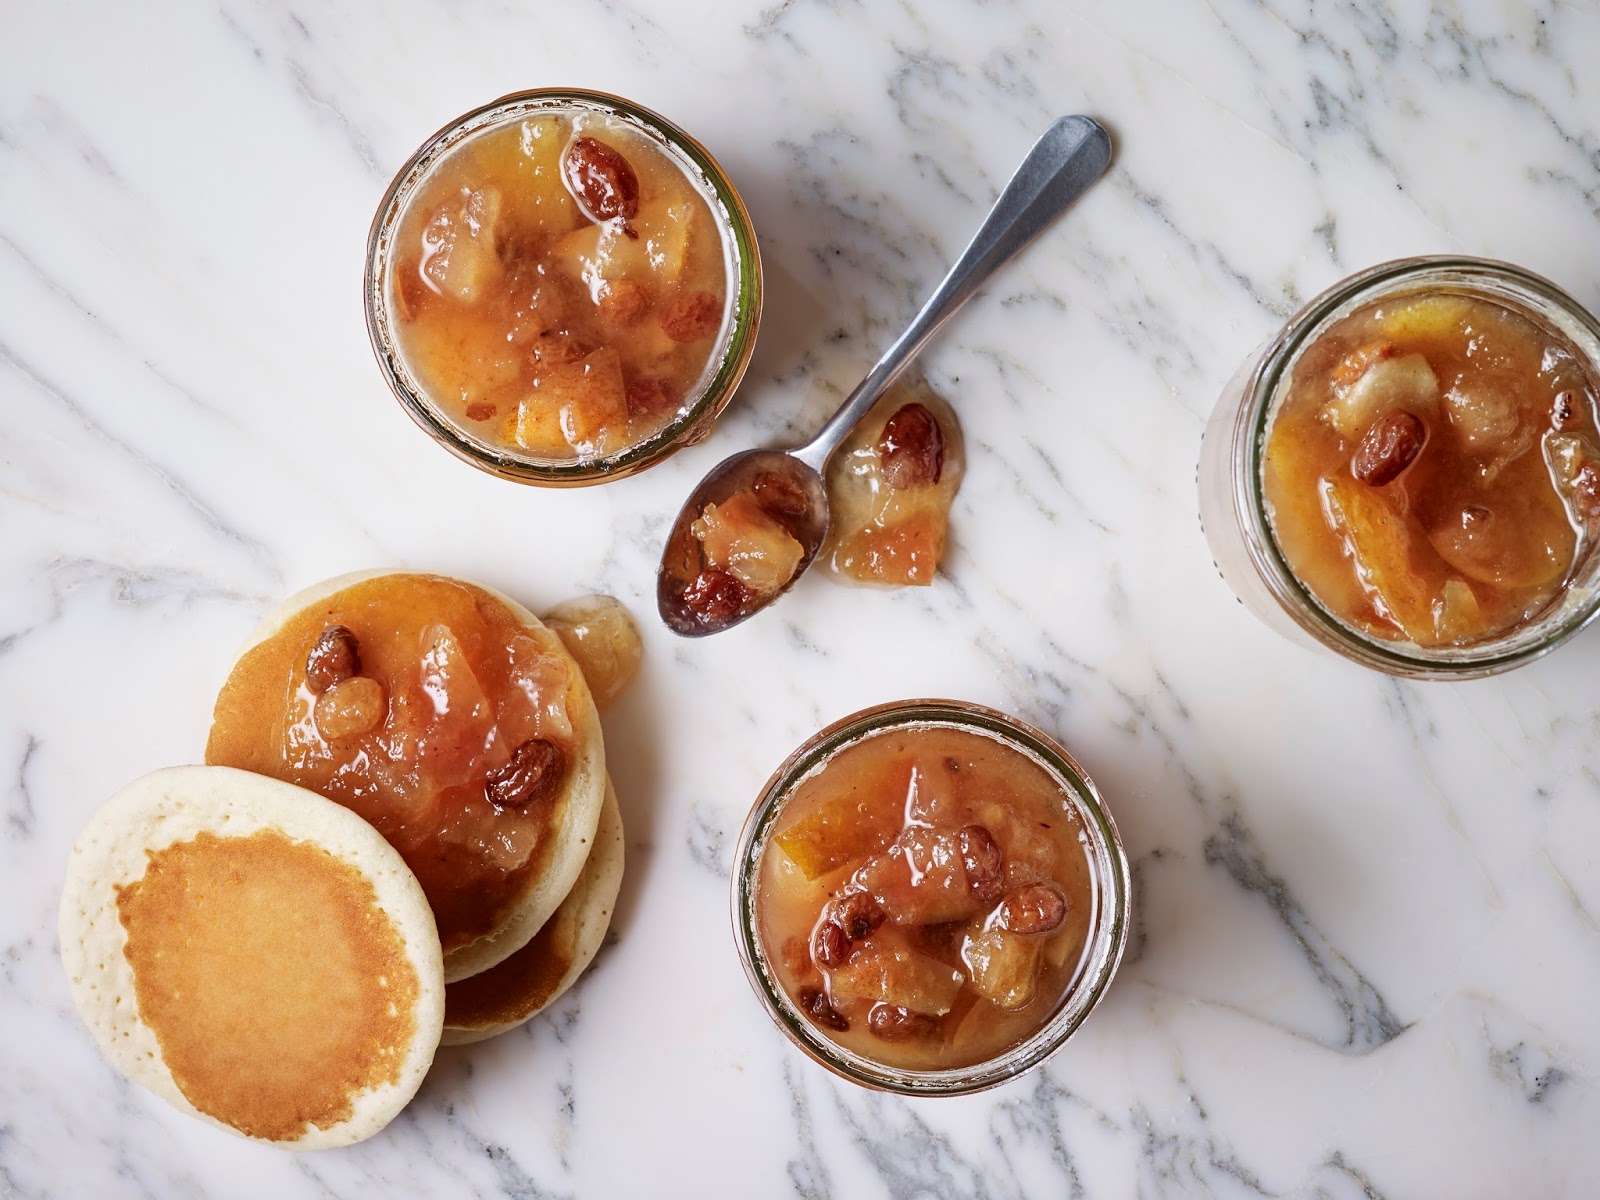 How To Make Apple Pie Jam: A Spoonful Anyone?